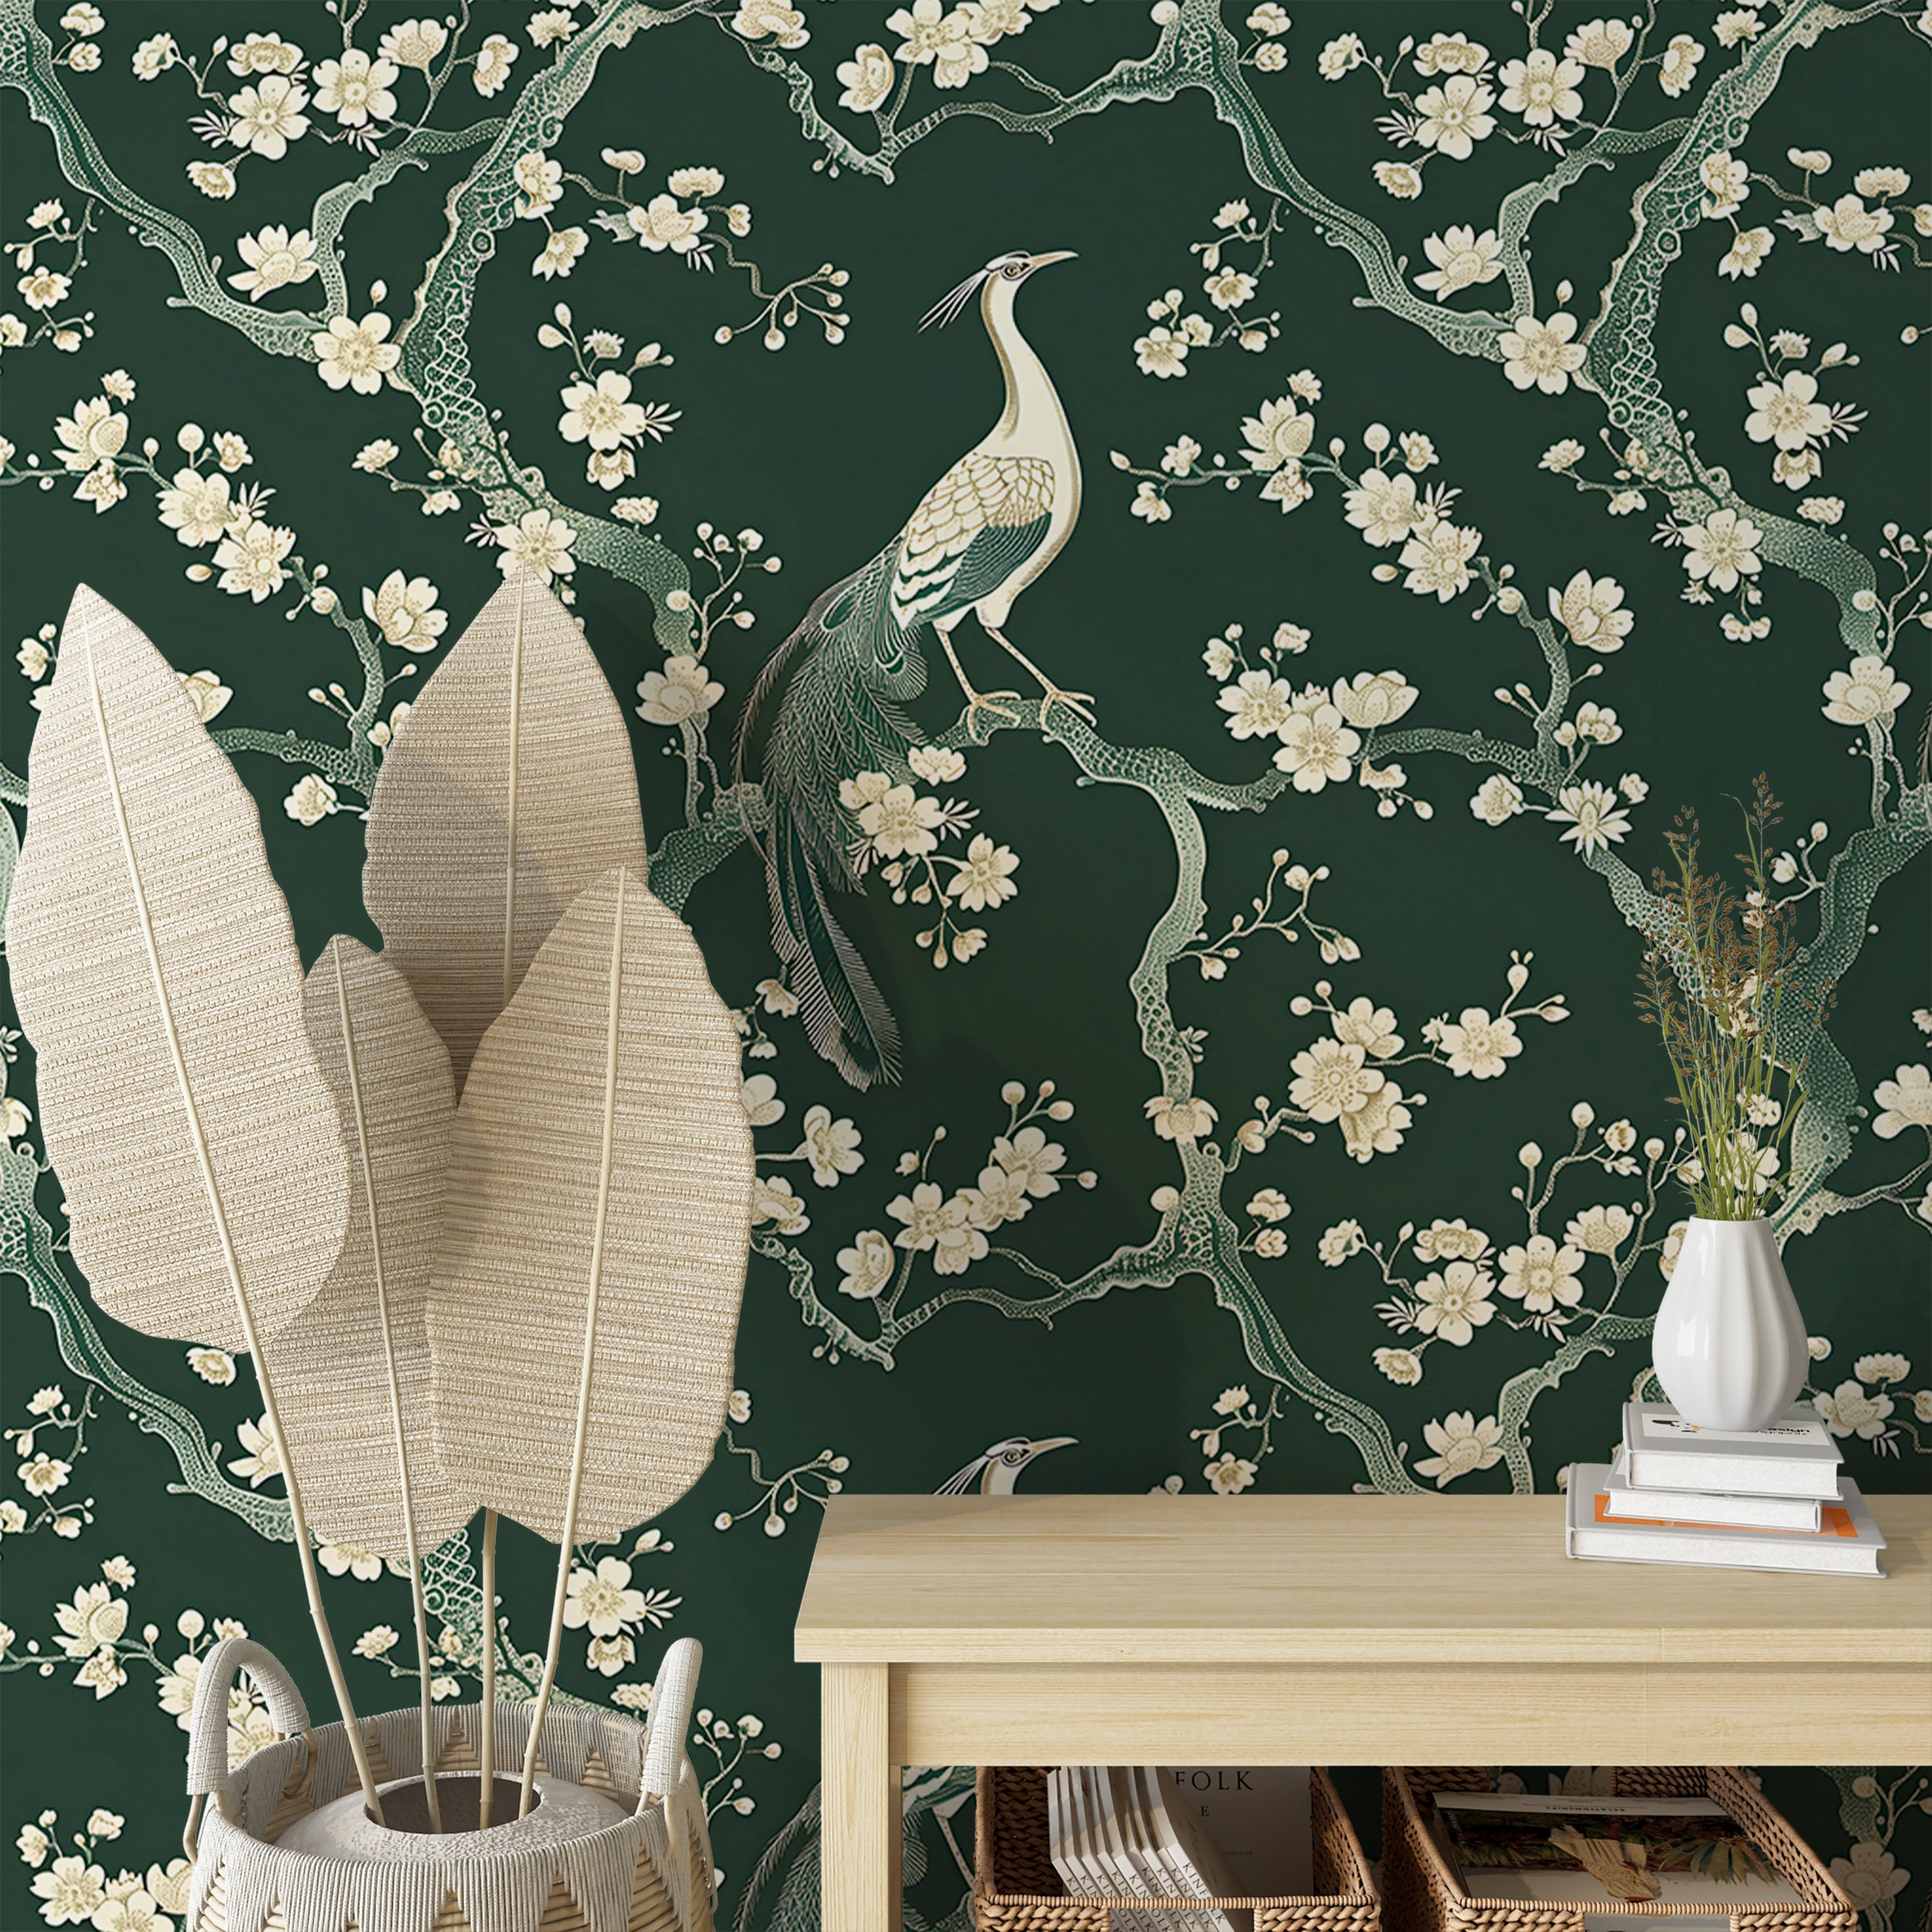 Removable chinoiserie wall decor